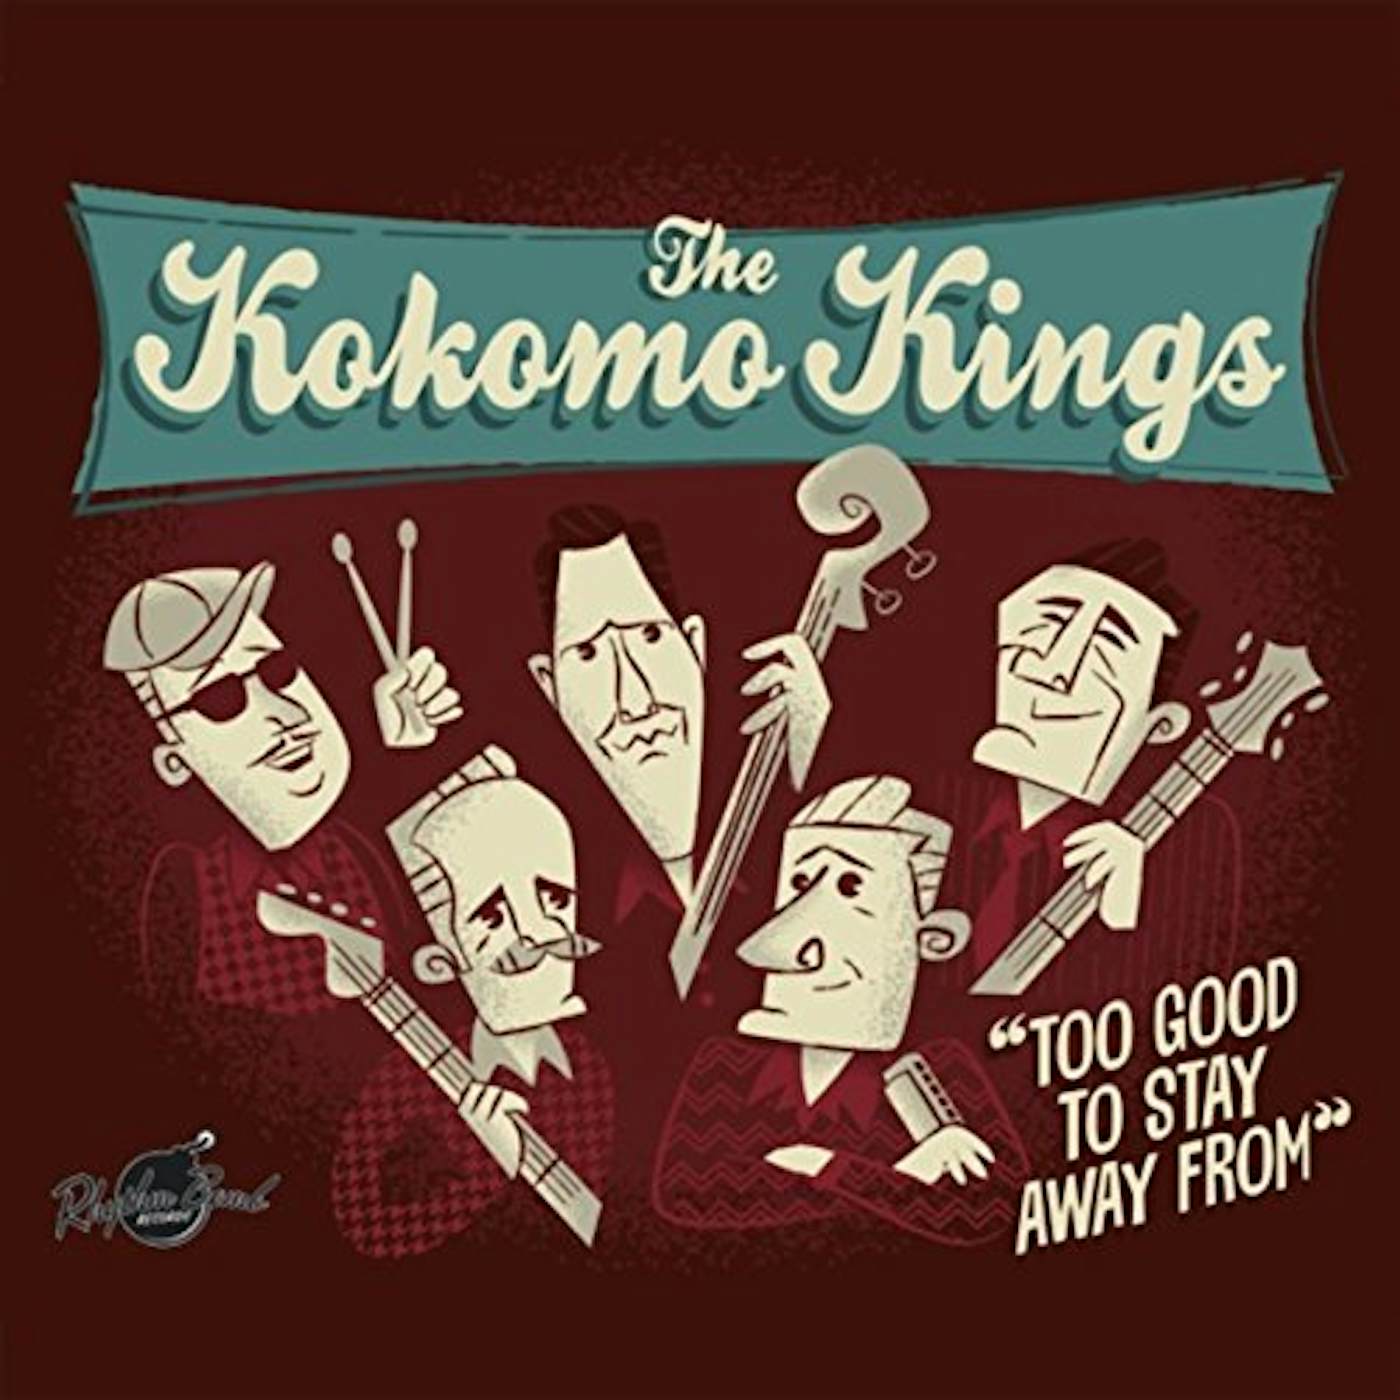 The Kokomo Kings TO GOOD TO STAY AWAY FROM CD